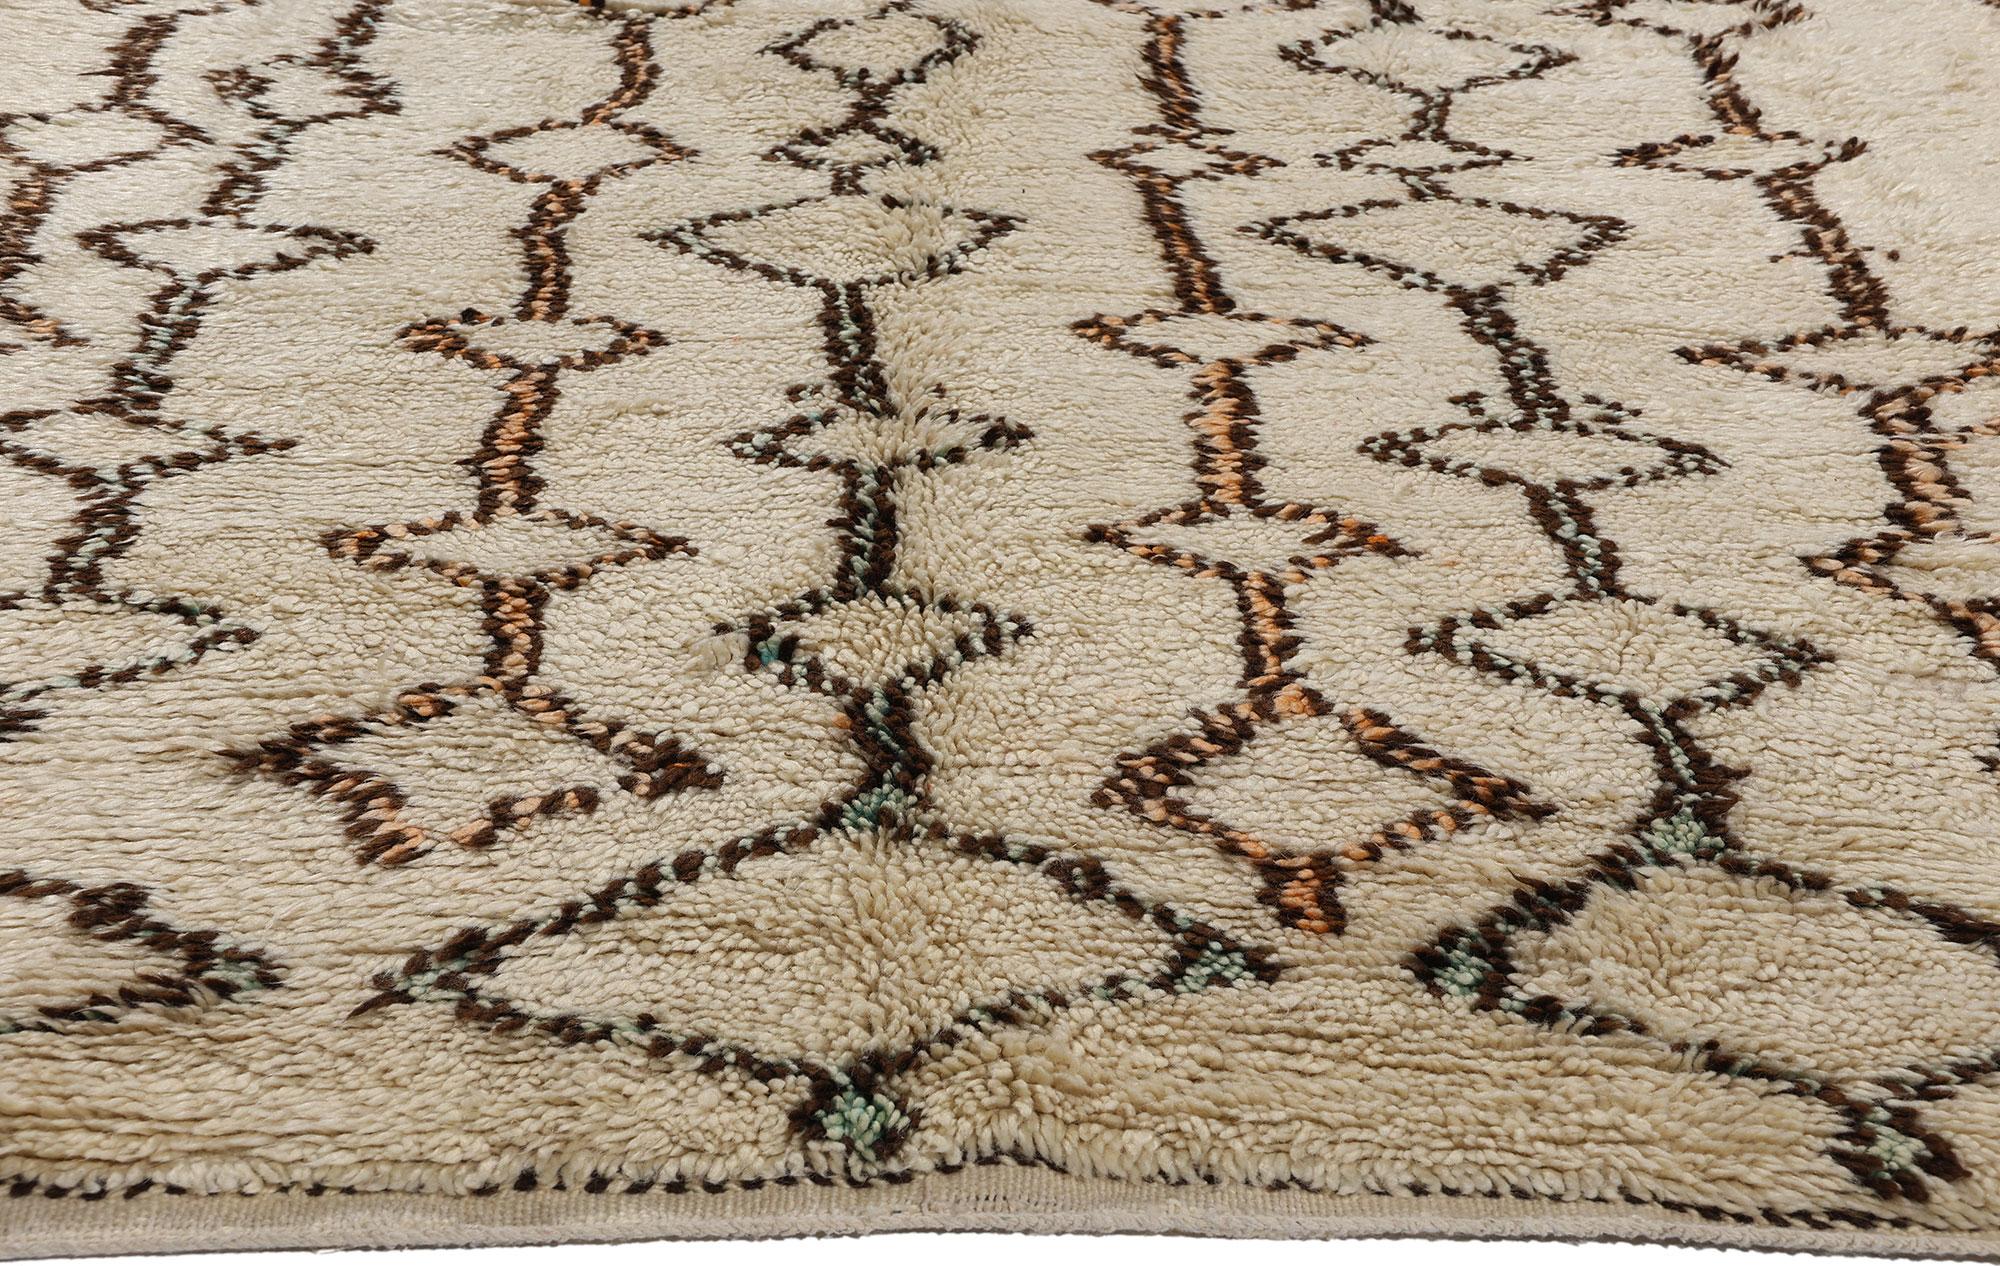 Hand-Knotted Vintage Beni Ourain Moroccan Rug, Mid-Century Modern Meets Tribal Enchantment For Sale